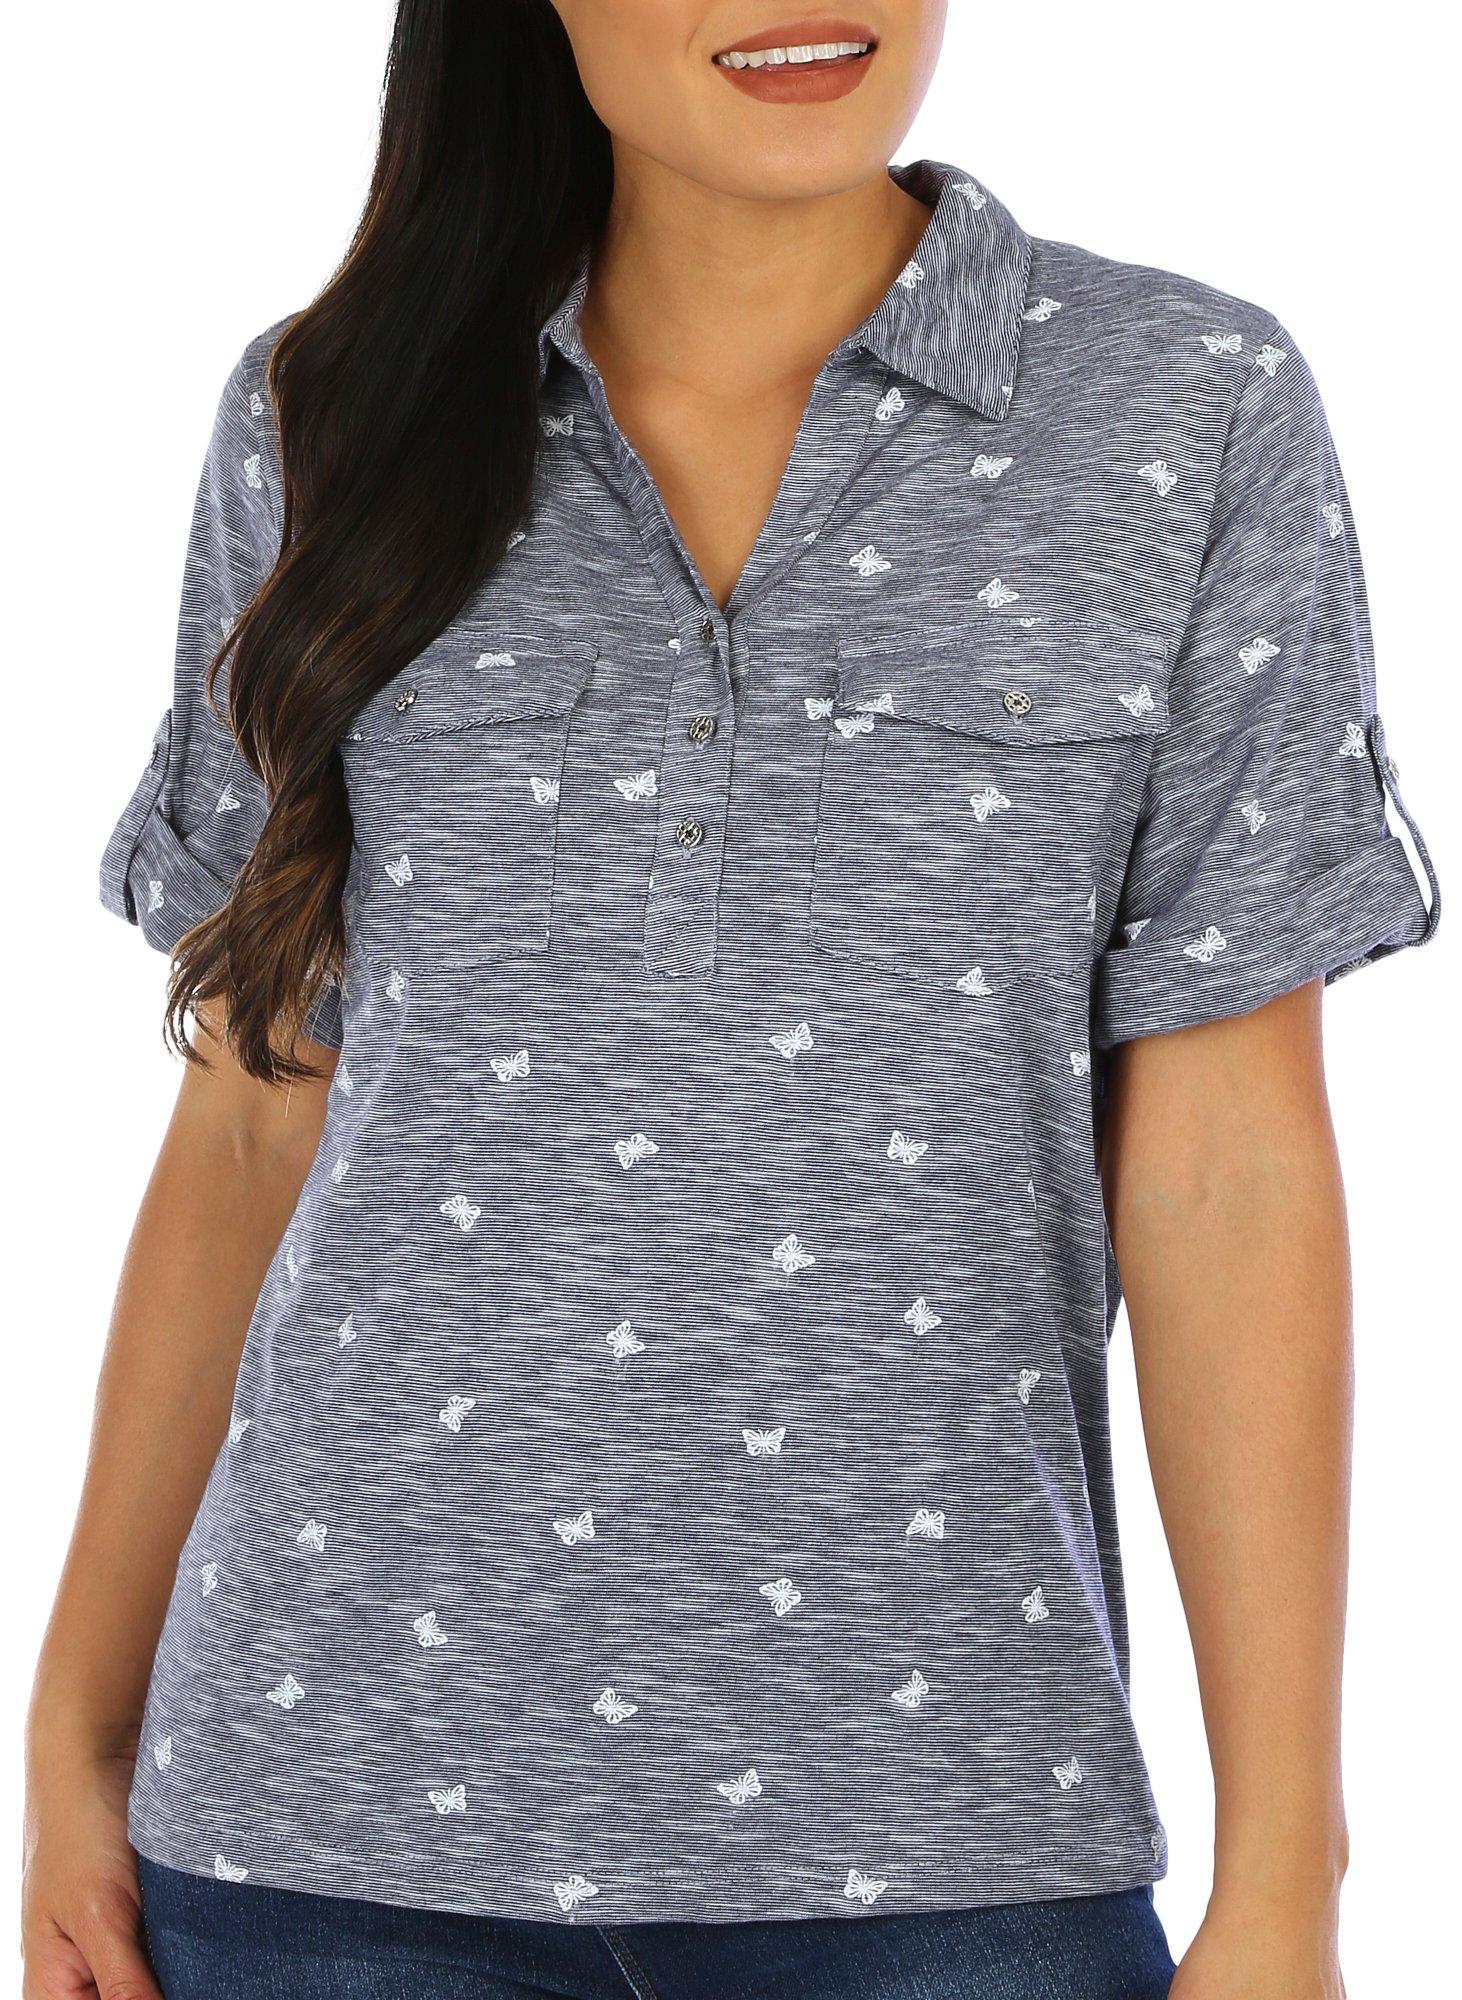 Coral Bay Petite Butterfly Short Sleeve Polo